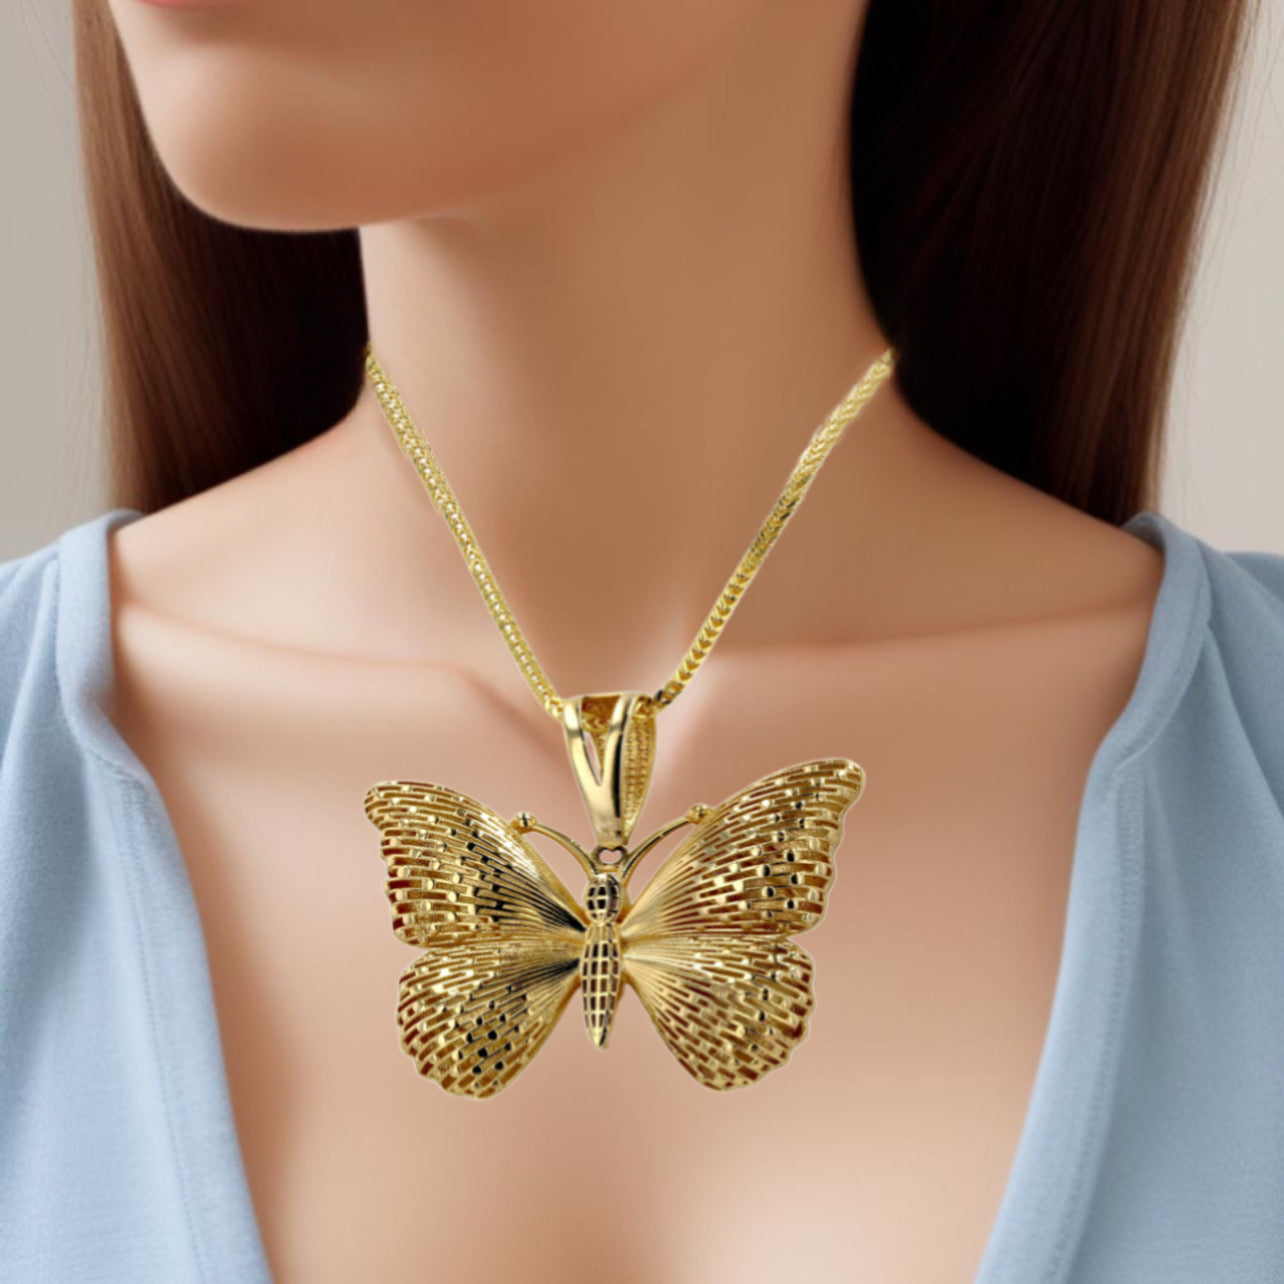 14K Yellow Gold Butterfly Necklace 1.5mm x 18''